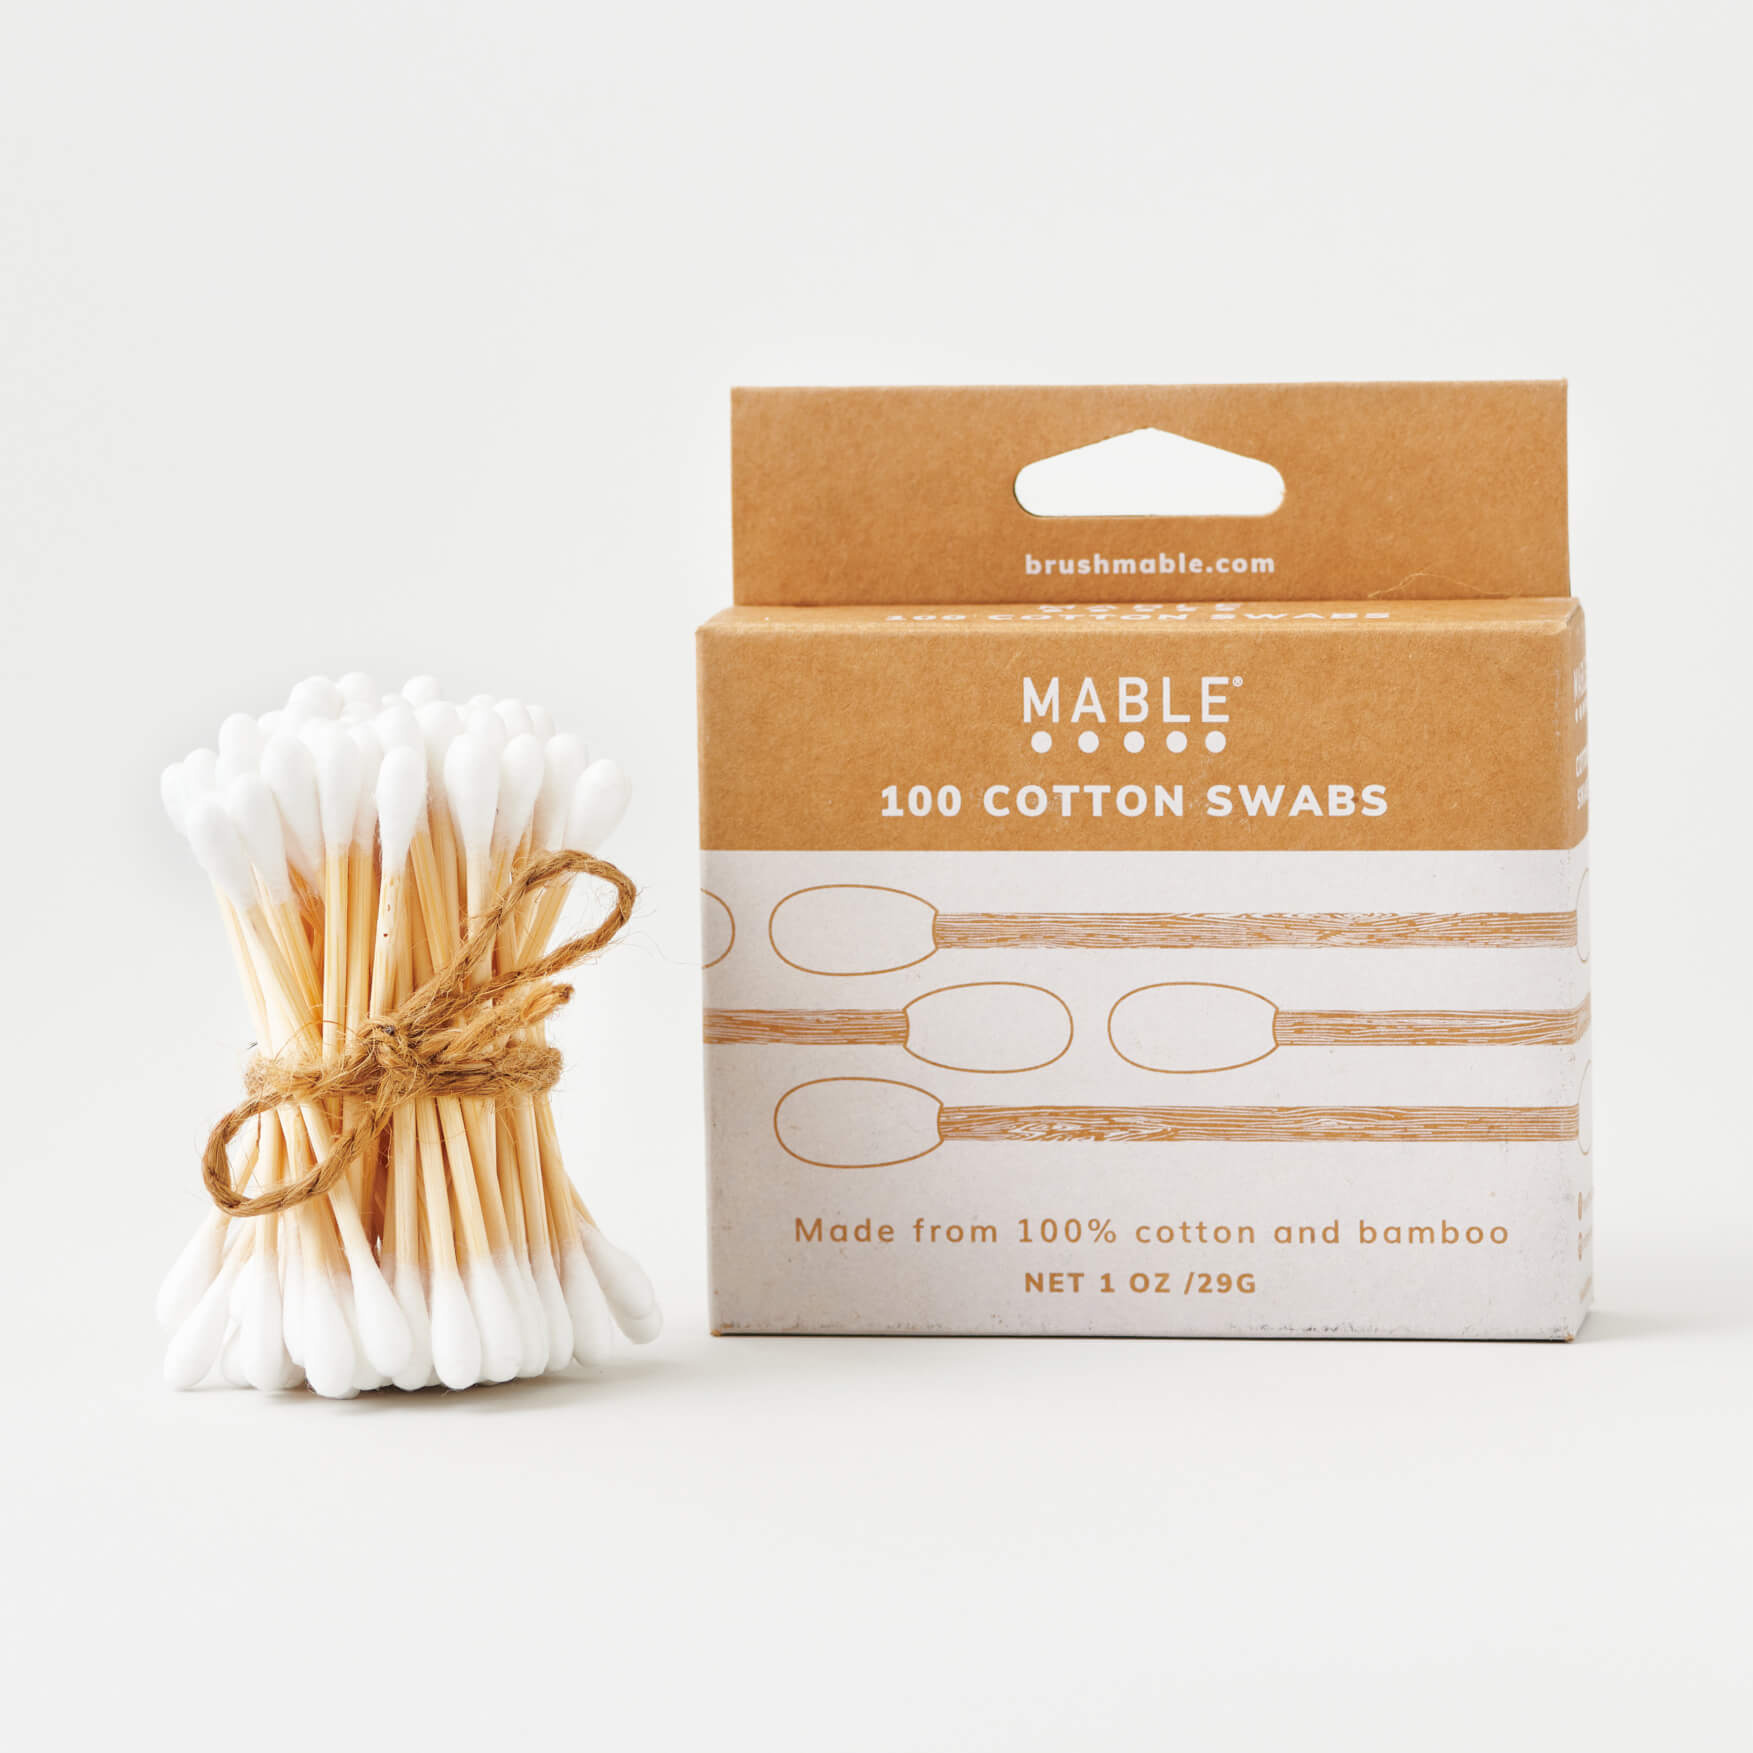 MABLE Cotton Swabs, eco-friendly cotton swabs, compostable cotton swabs, cotton buds, biodegradable cotton swabs